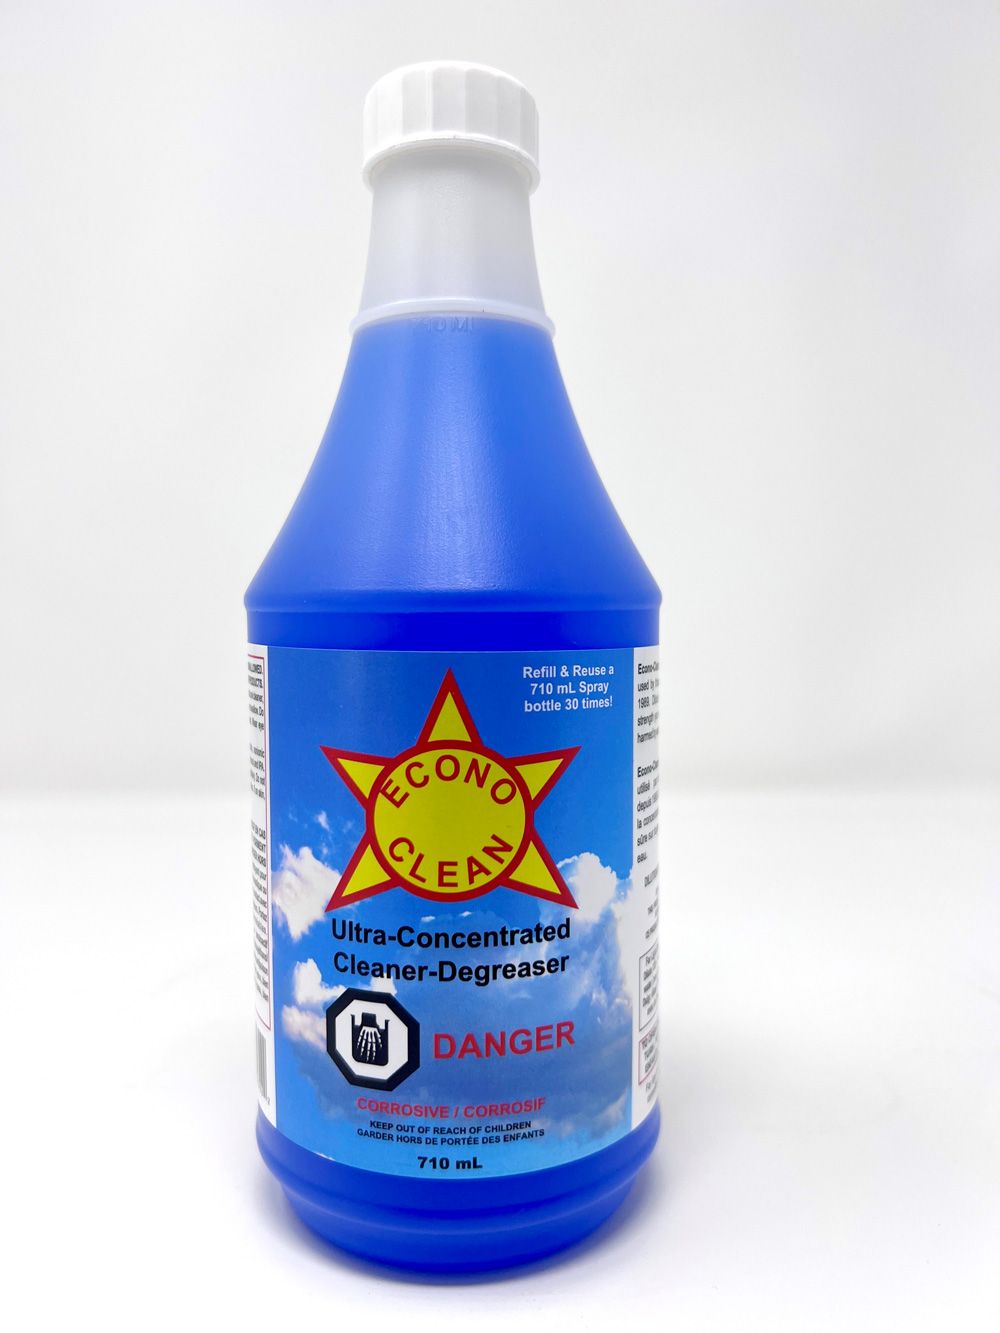 A blue bottle of second clean has a yellow star on the label